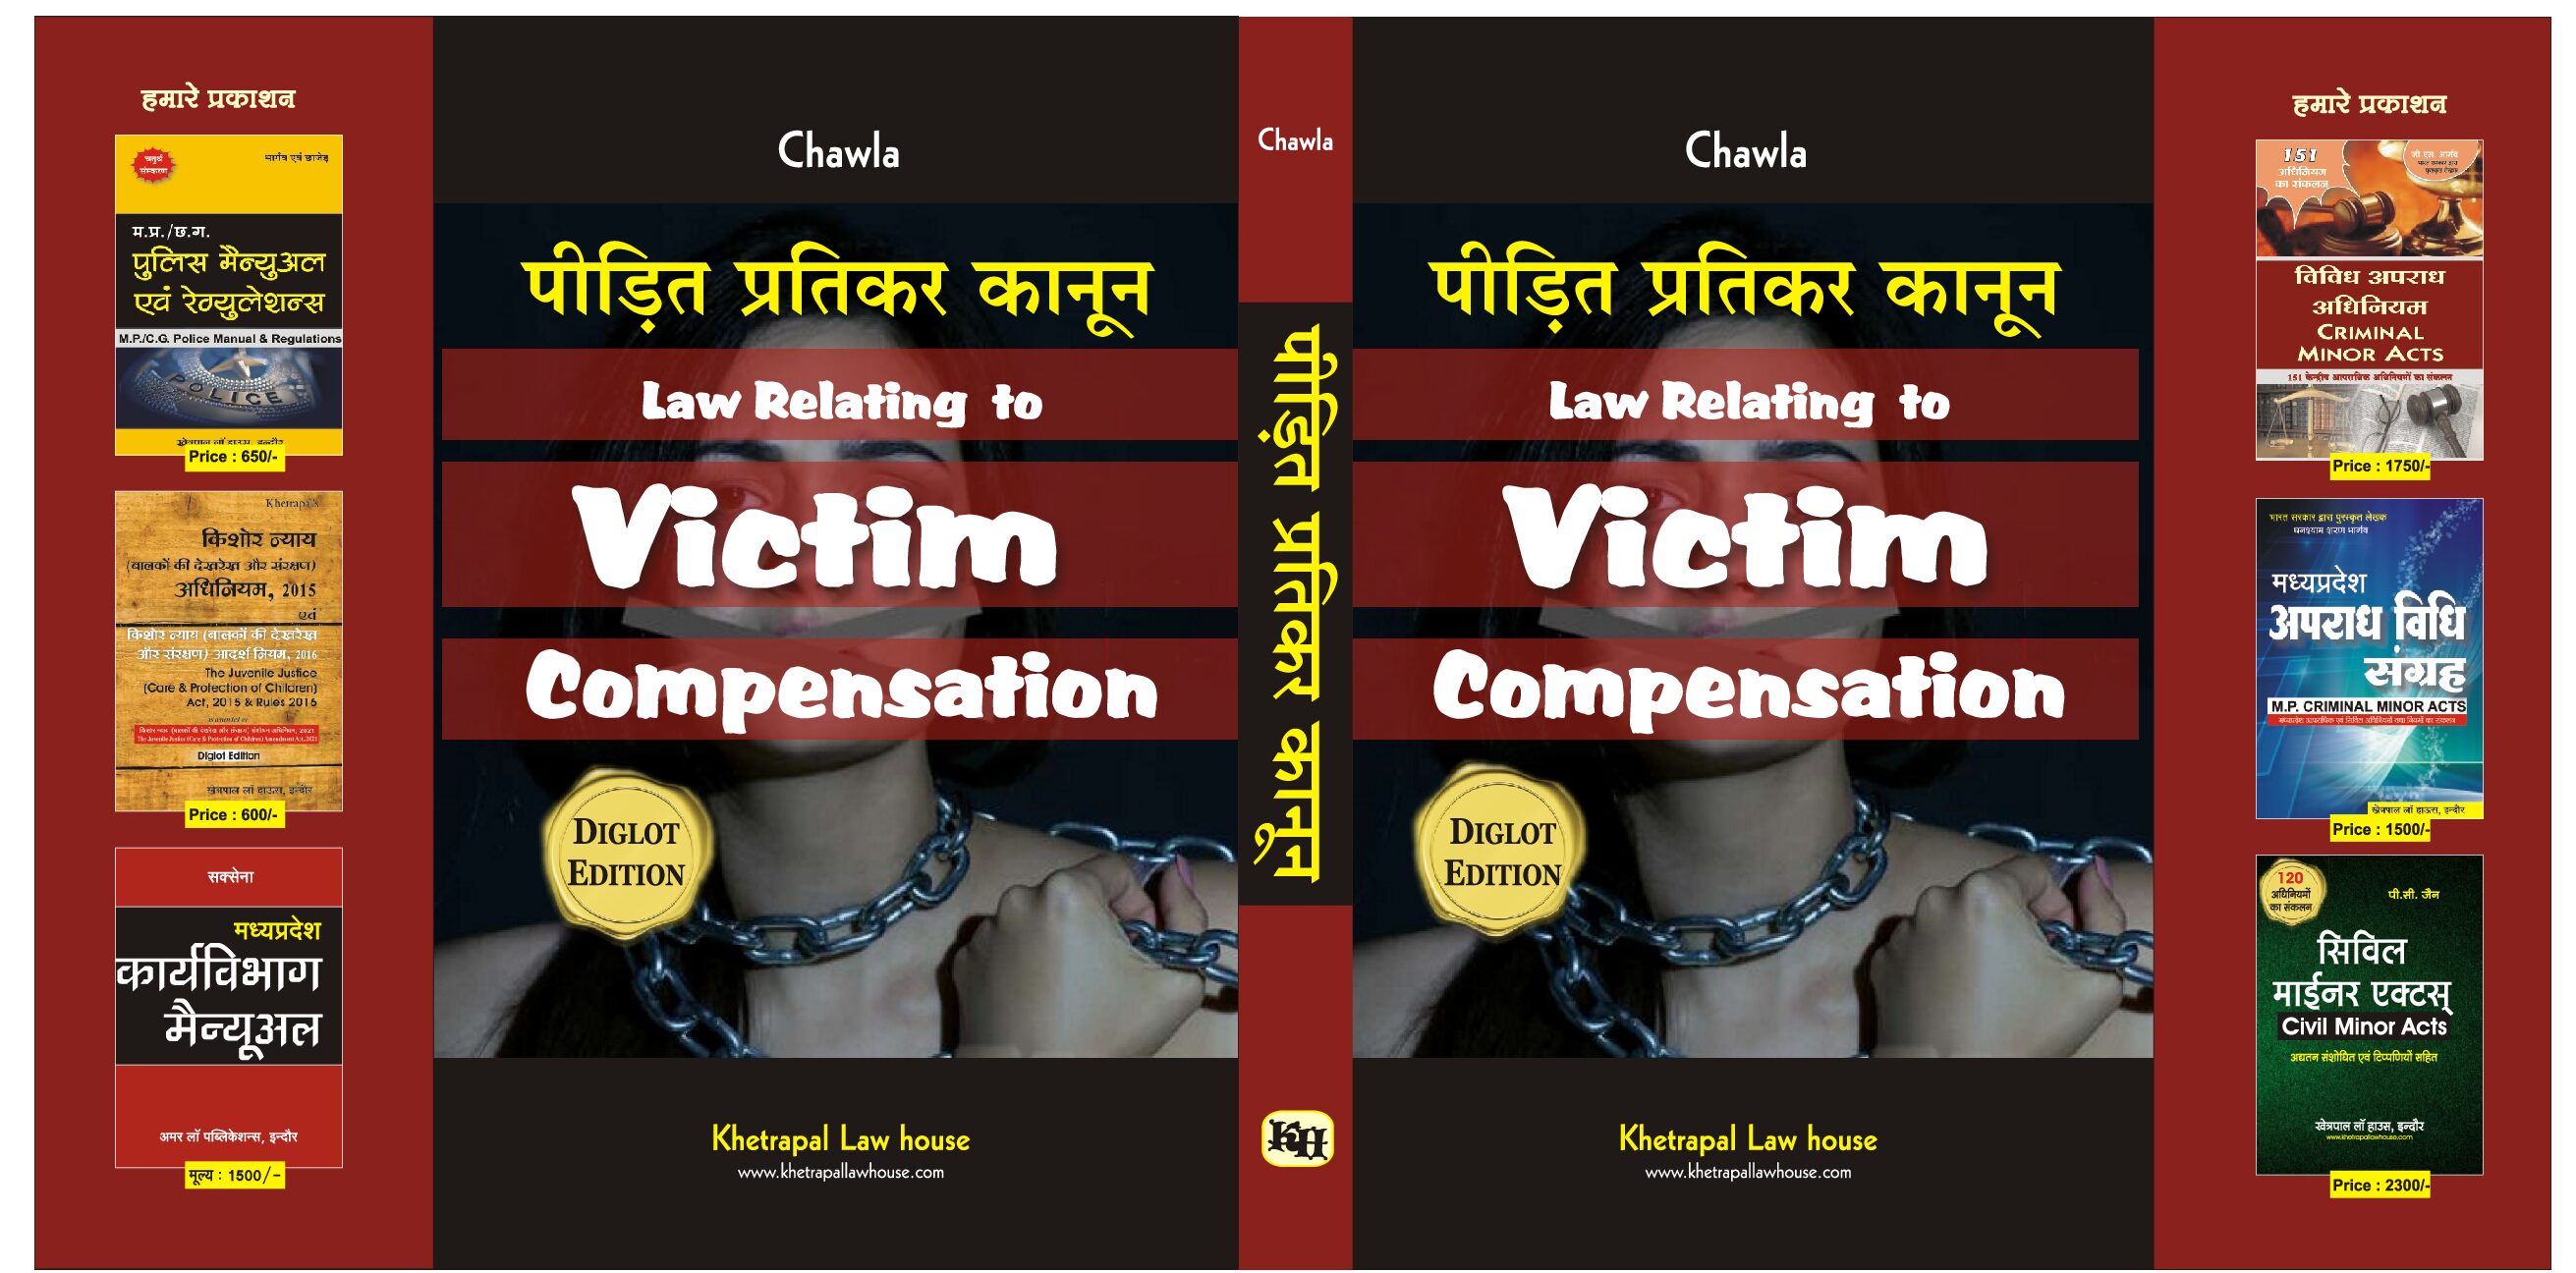 Chawla Law Relating  to Victim compensation Diglot Edition Publish By Khetrapal Law House Indore